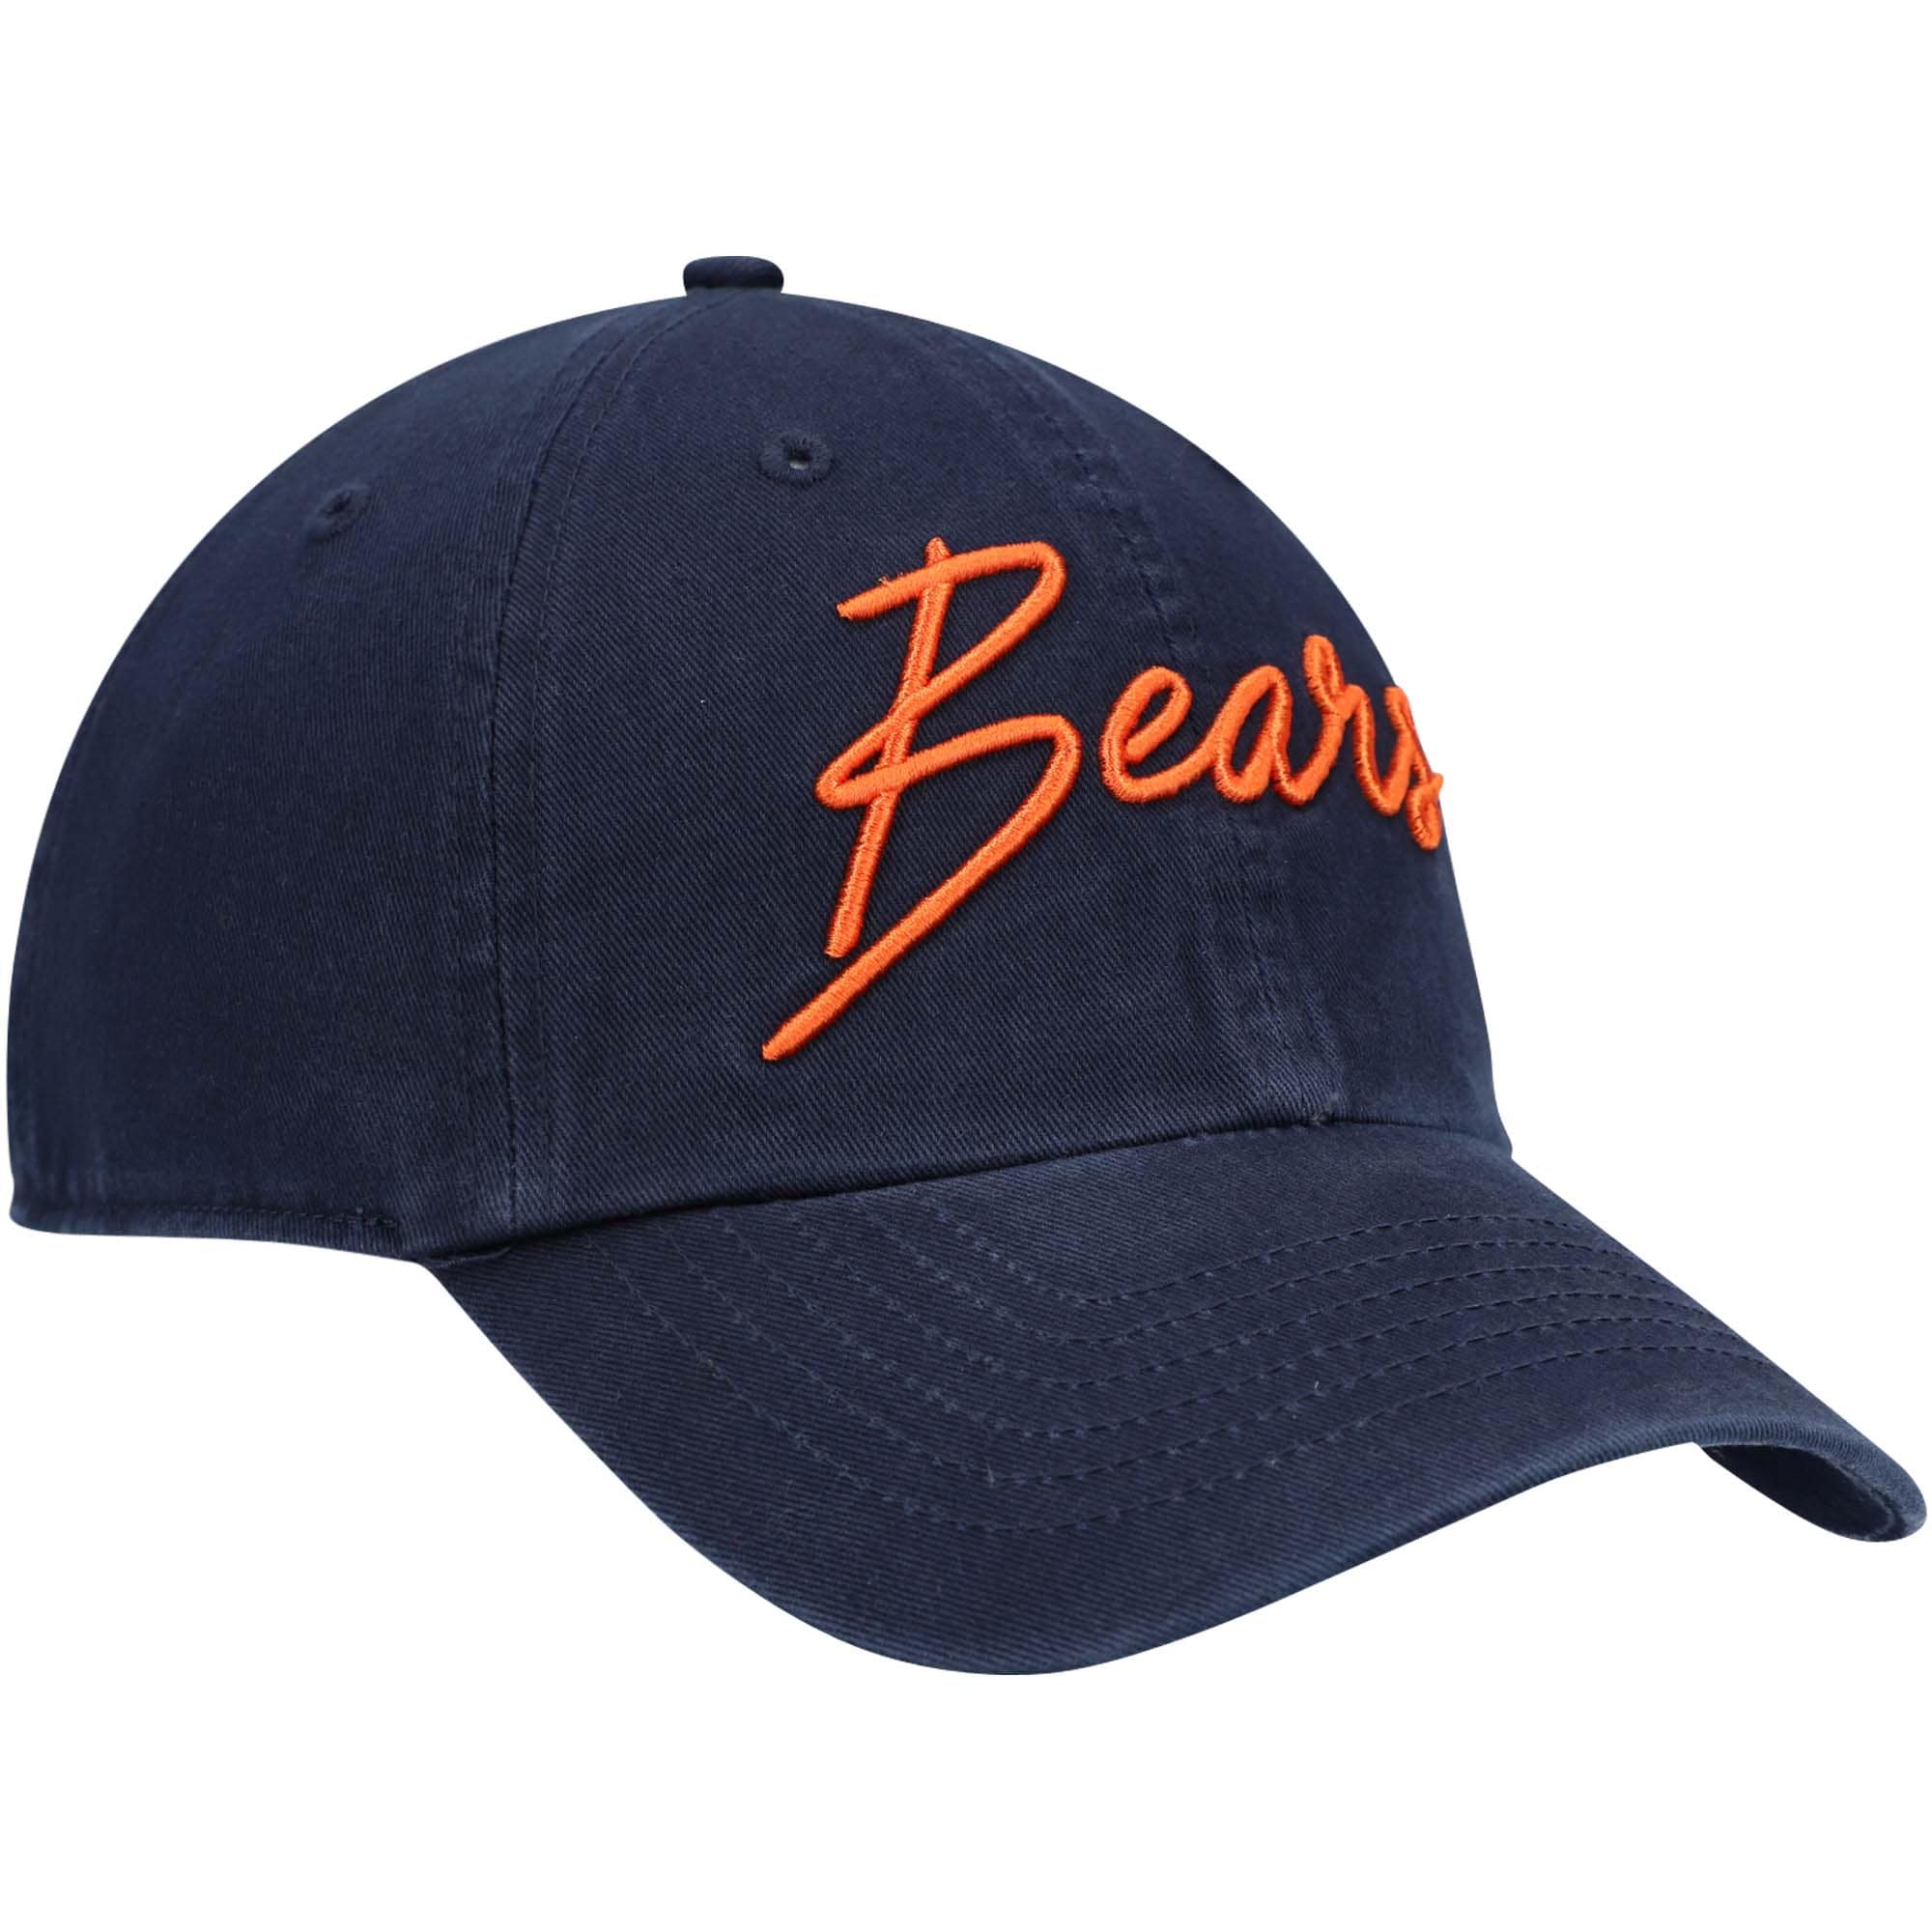 Women's '47 Navy Chicago Bears Vocal Clean Up Adjustable Hat - OSFA - image 3 of 4